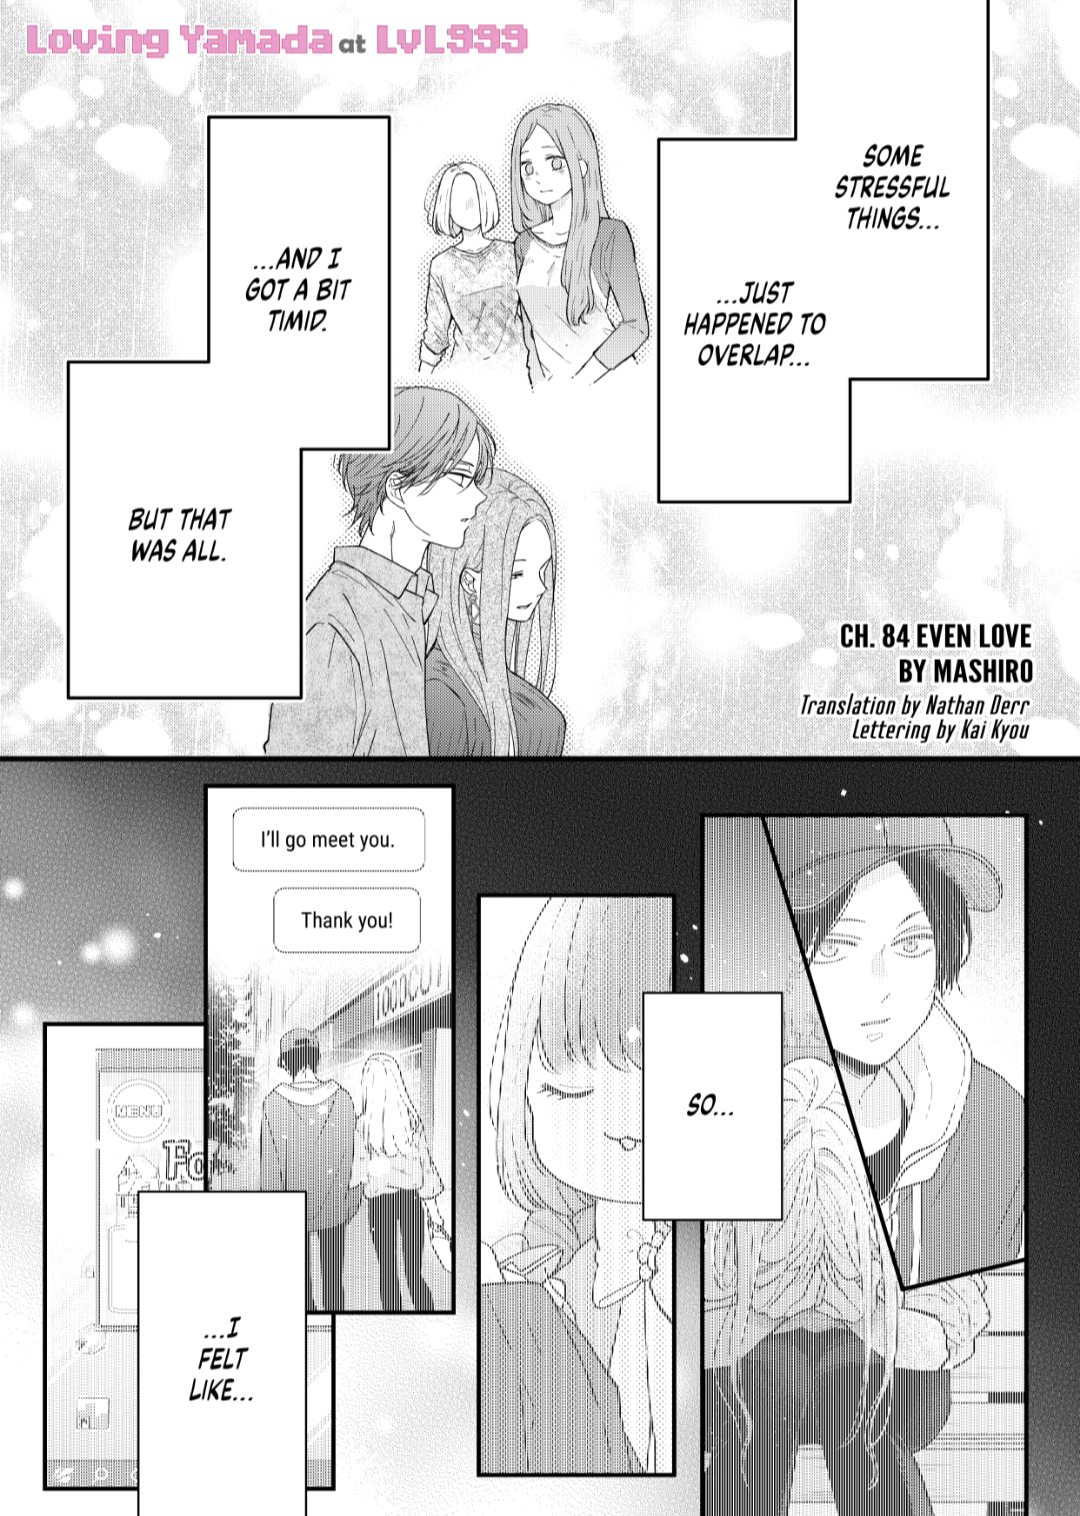 Chapter 84, My Love Story with Yamada-kun at Lv999